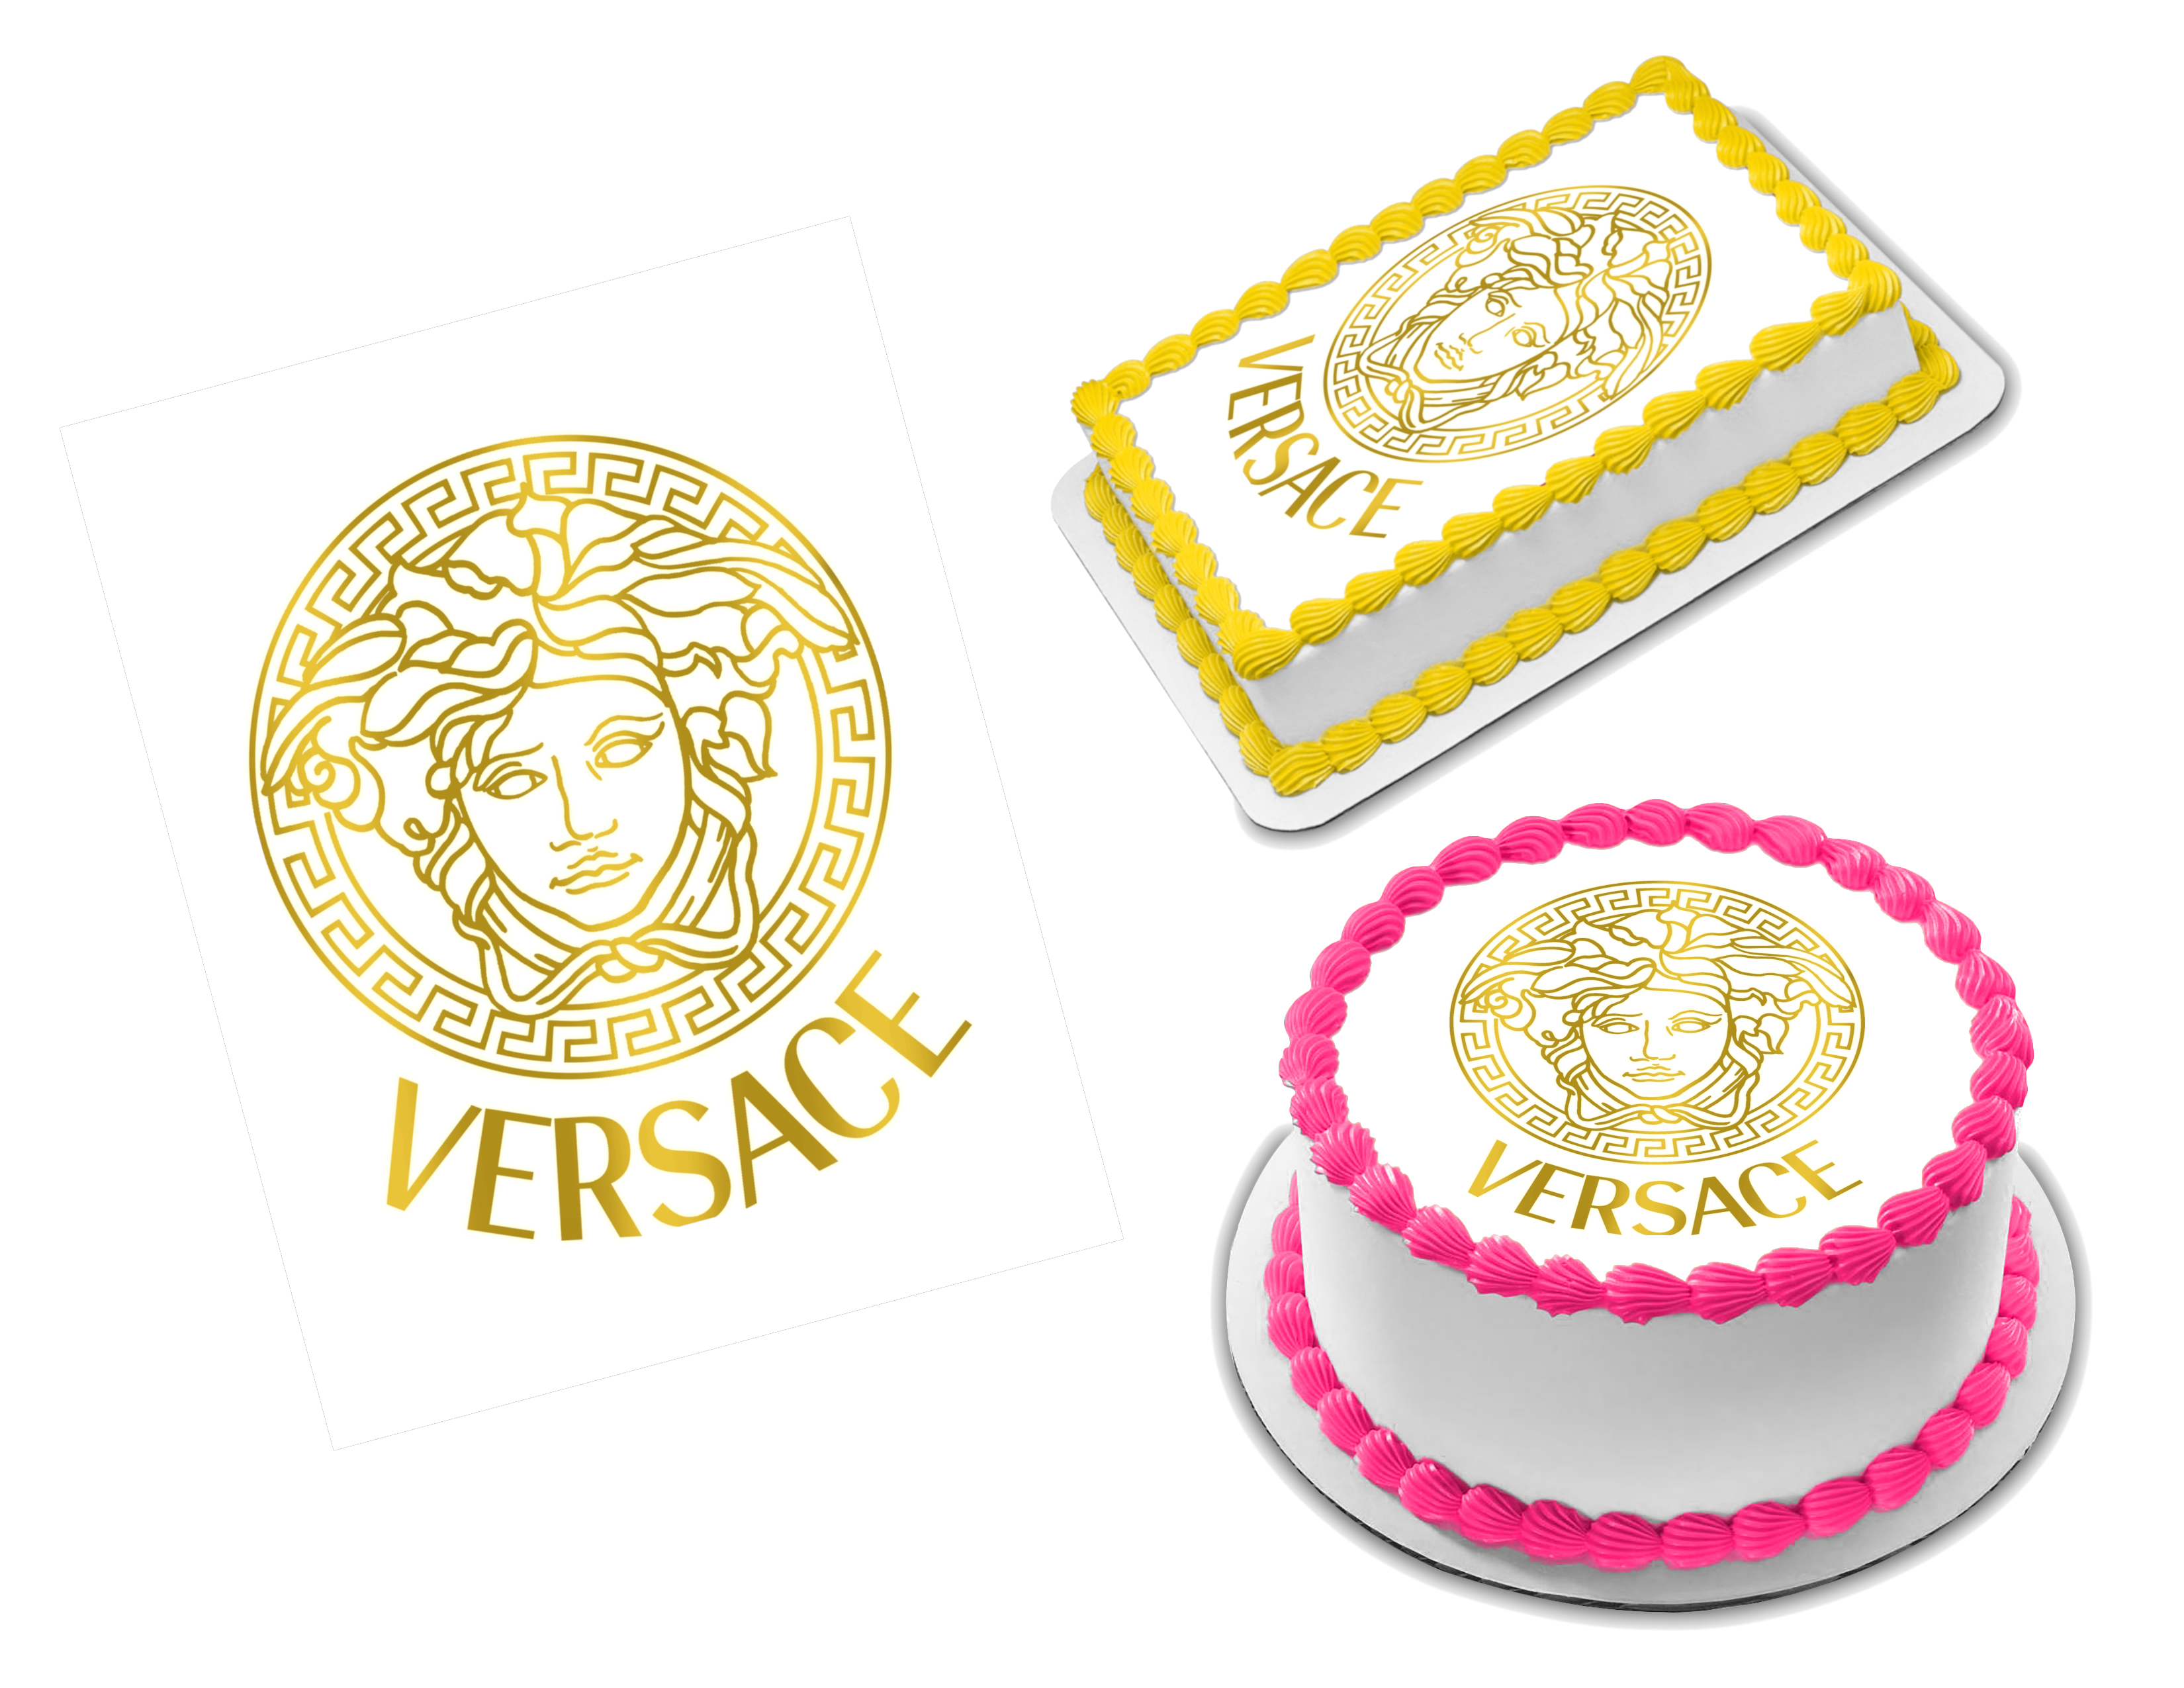 Versace style cake Topper edible Icing or Wafer